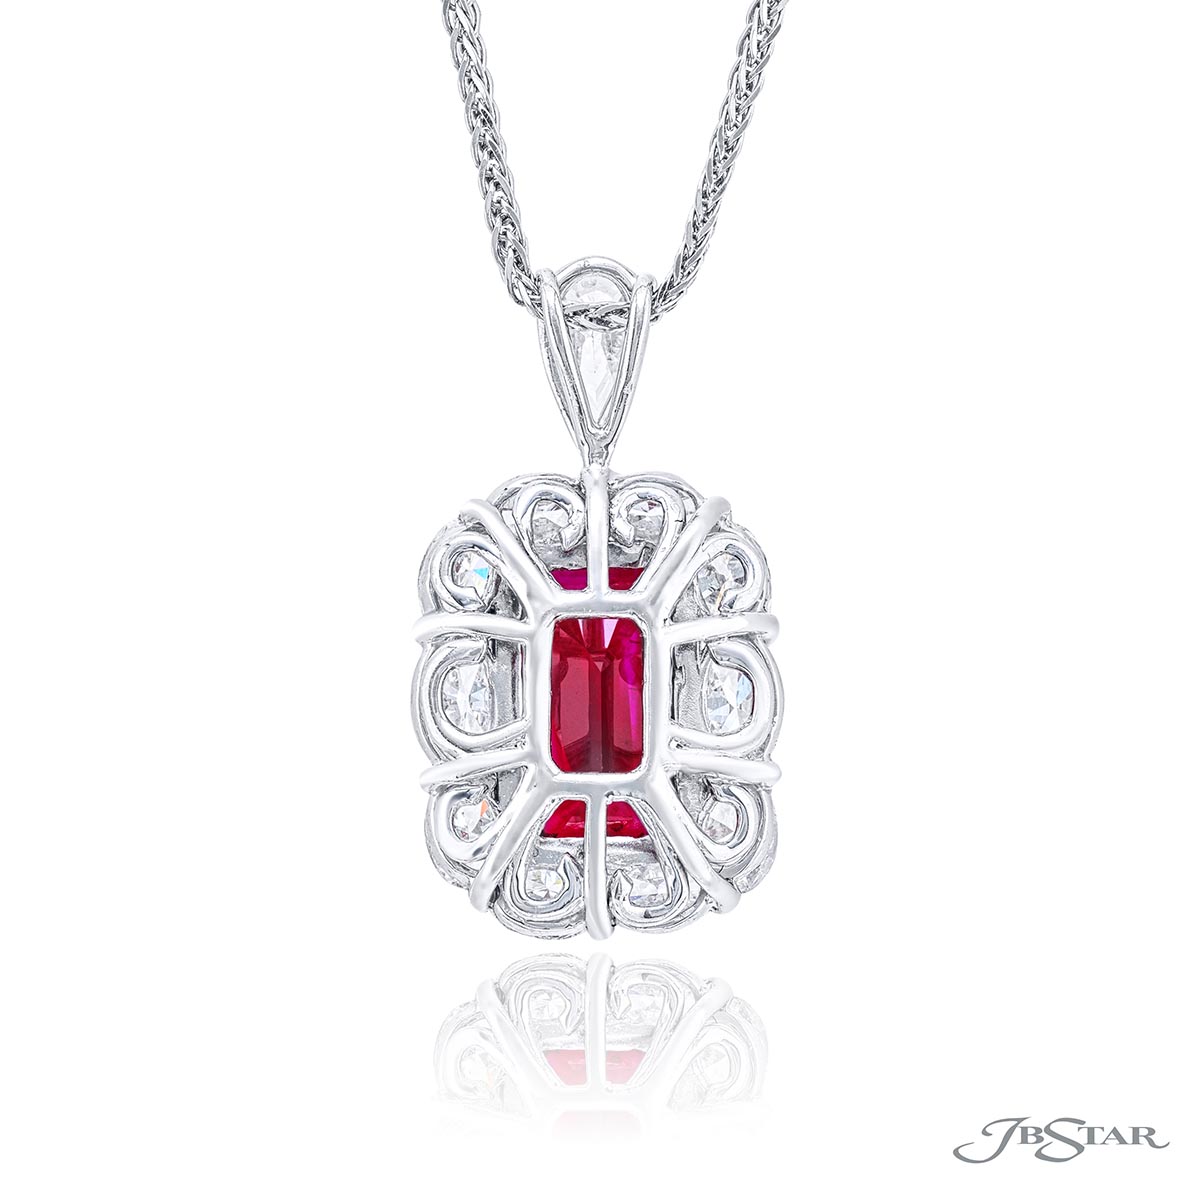 Pink spinel 7.55ct. oval and diamond pendant